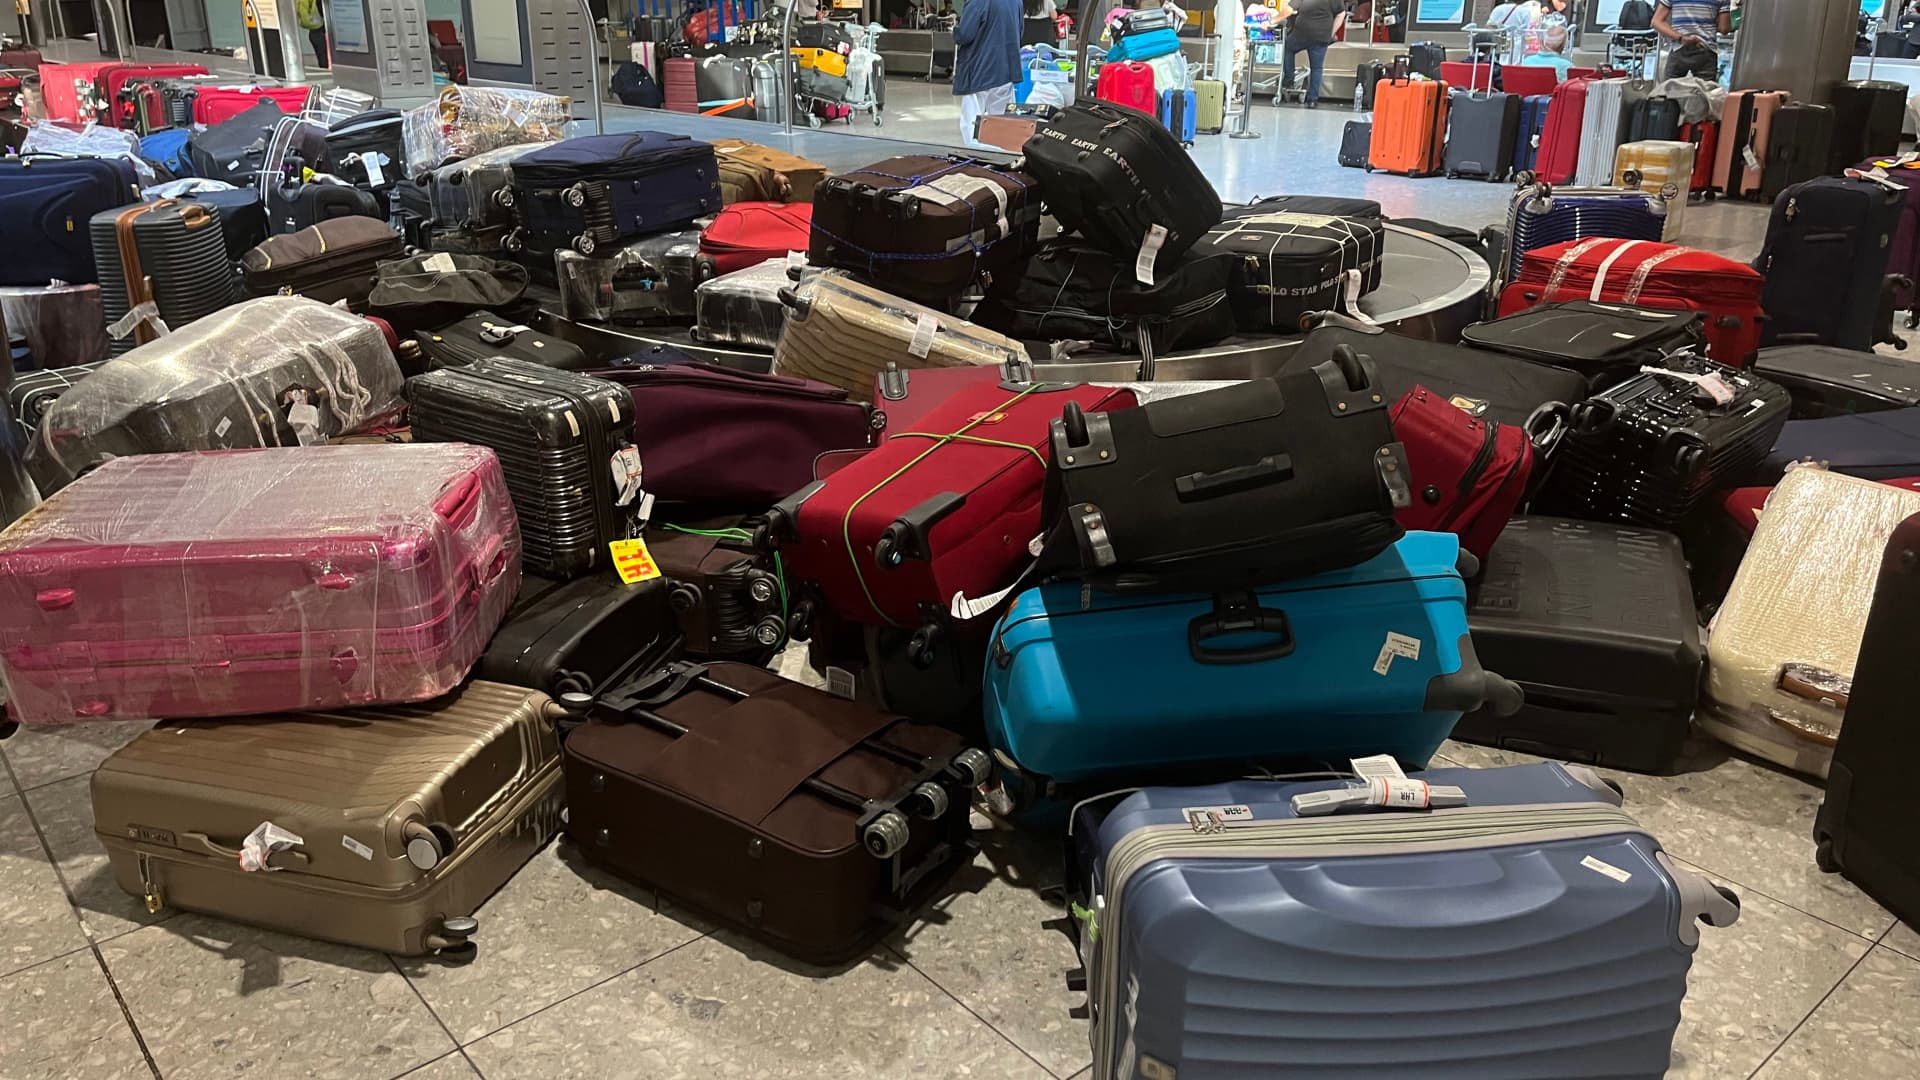 Uncollected suitcases at Heathrow Airport. The U.K.'s biggest airport has told airlines to stop selling summer tickets.